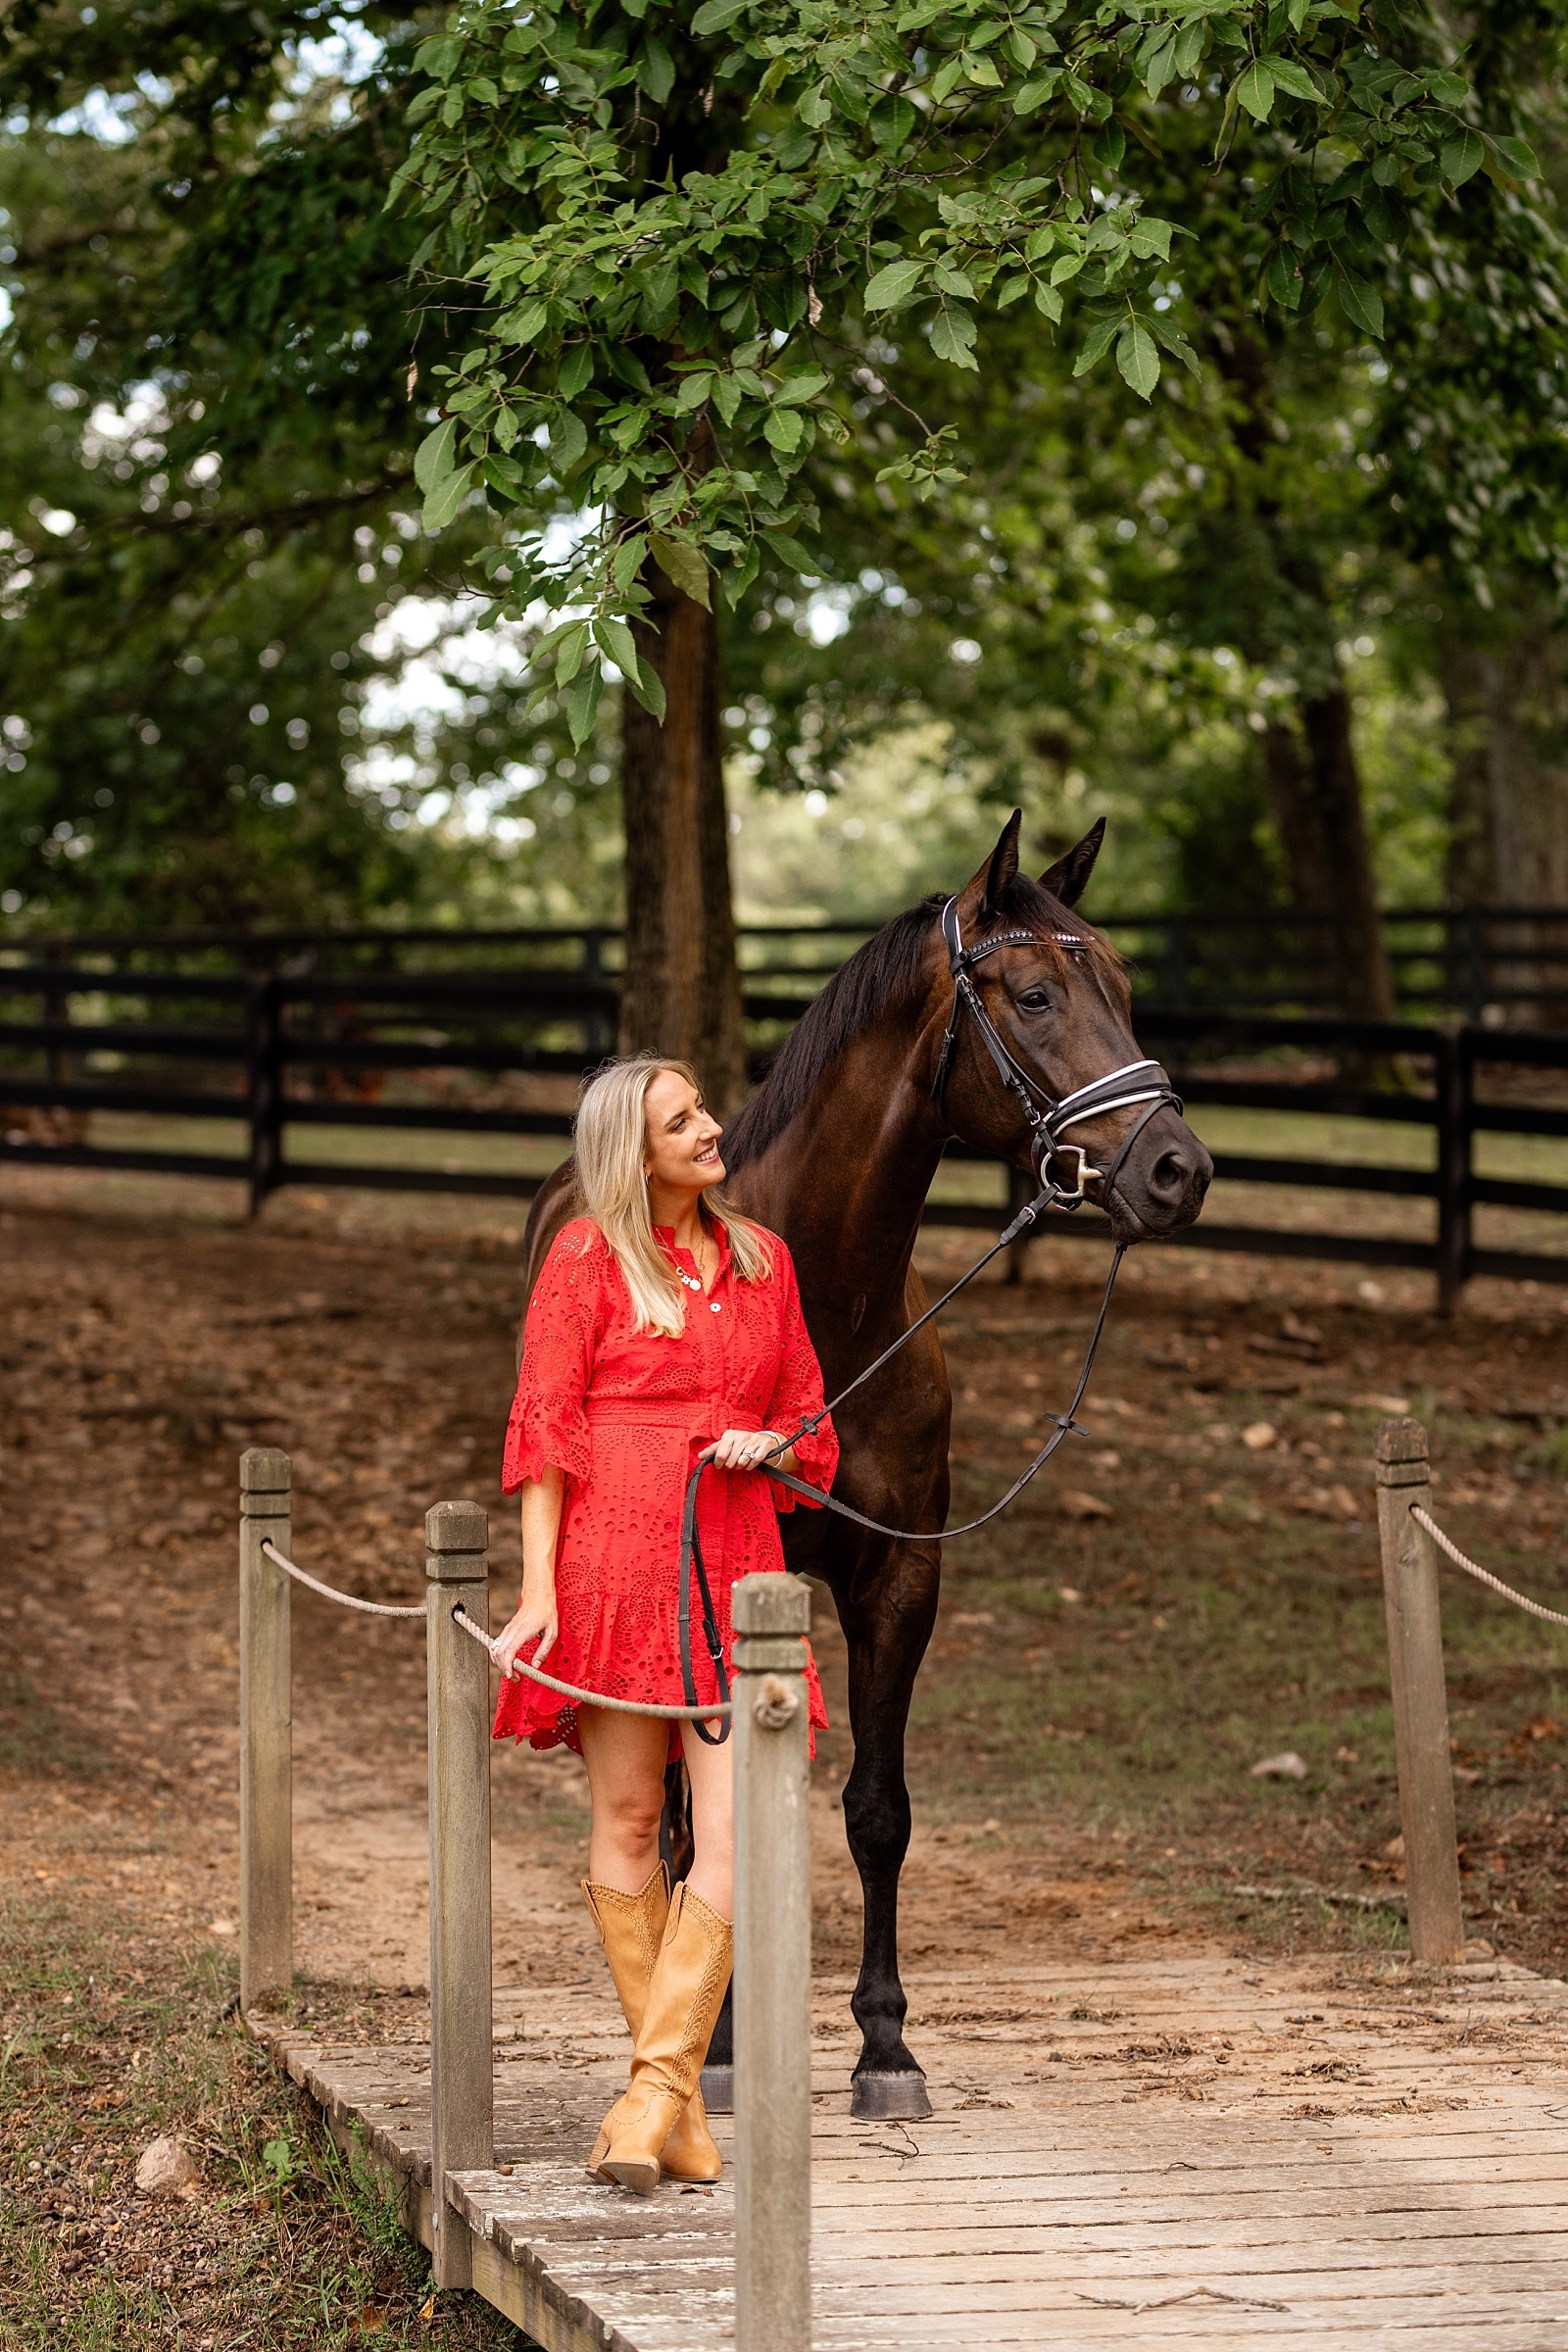 Girl in red dress takes photos with her horse in Atlanta, Georgia. Dressage Rider. Outfit ideas for horse and rider photoshoot. Atlanta equine photographer.